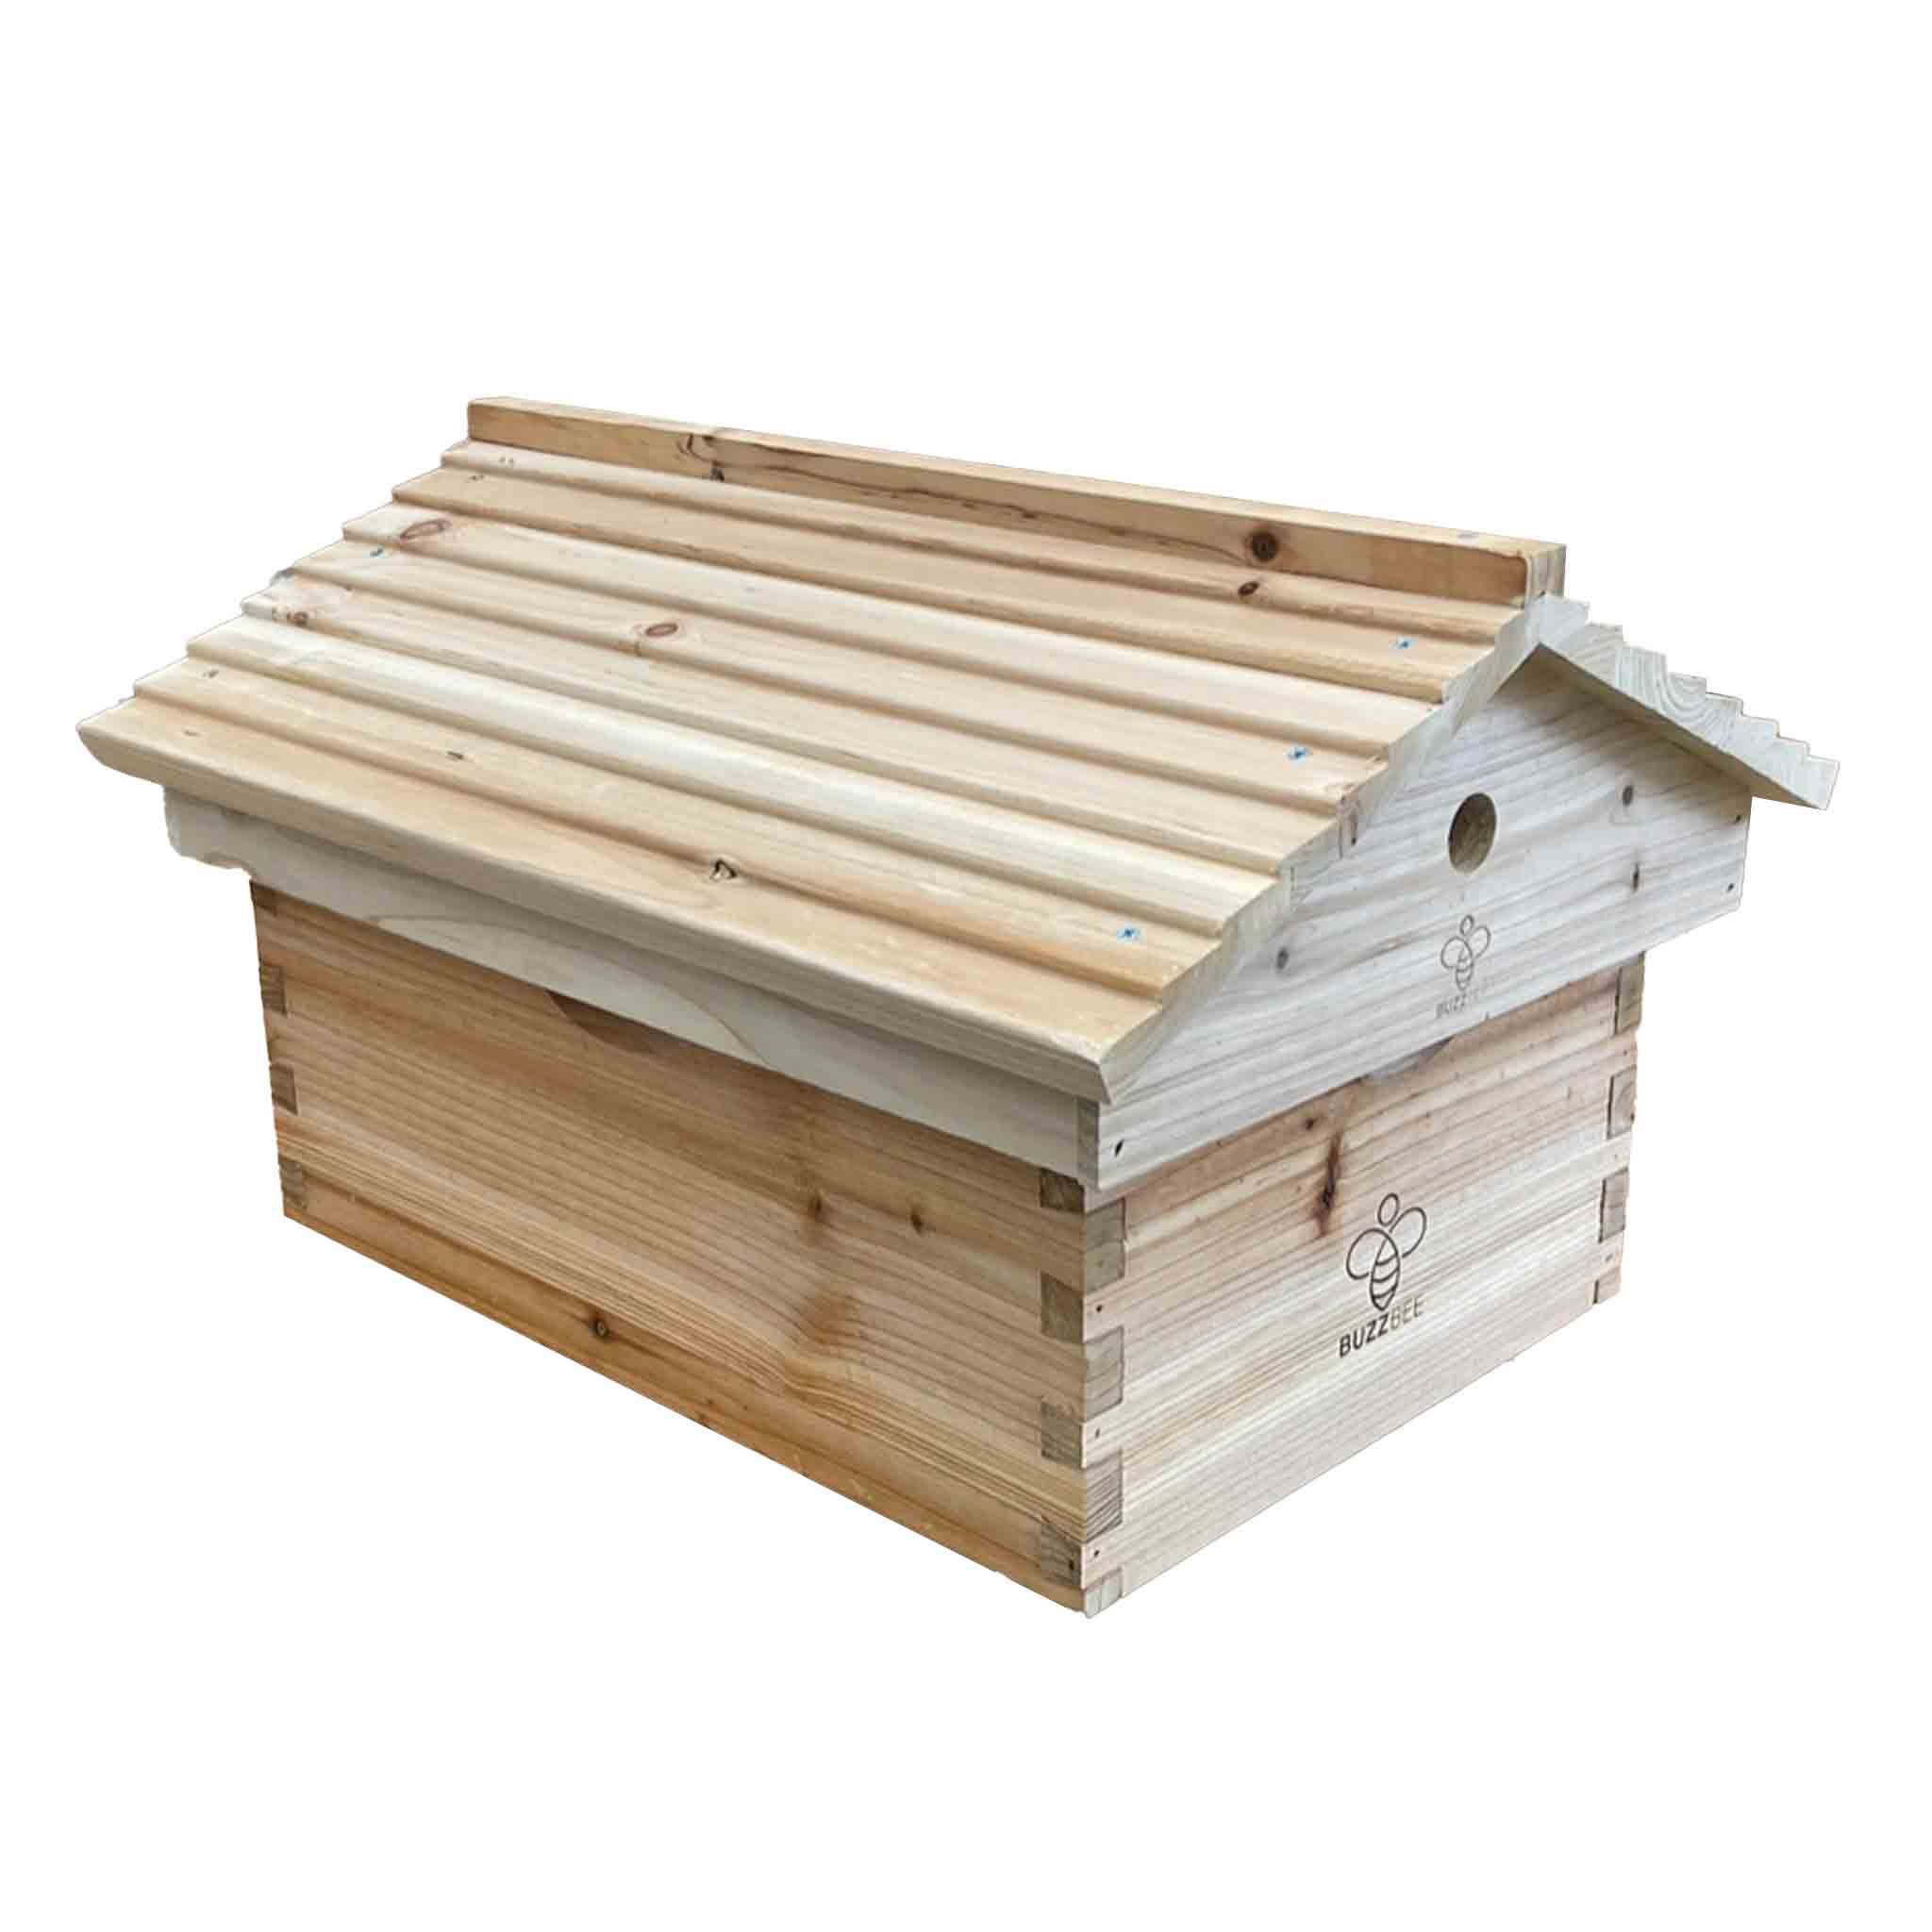 Gabled Lid/Roof/Outer Cover for your beehive - Hive Parts collection by Buzzbee Beekeeping Supplies